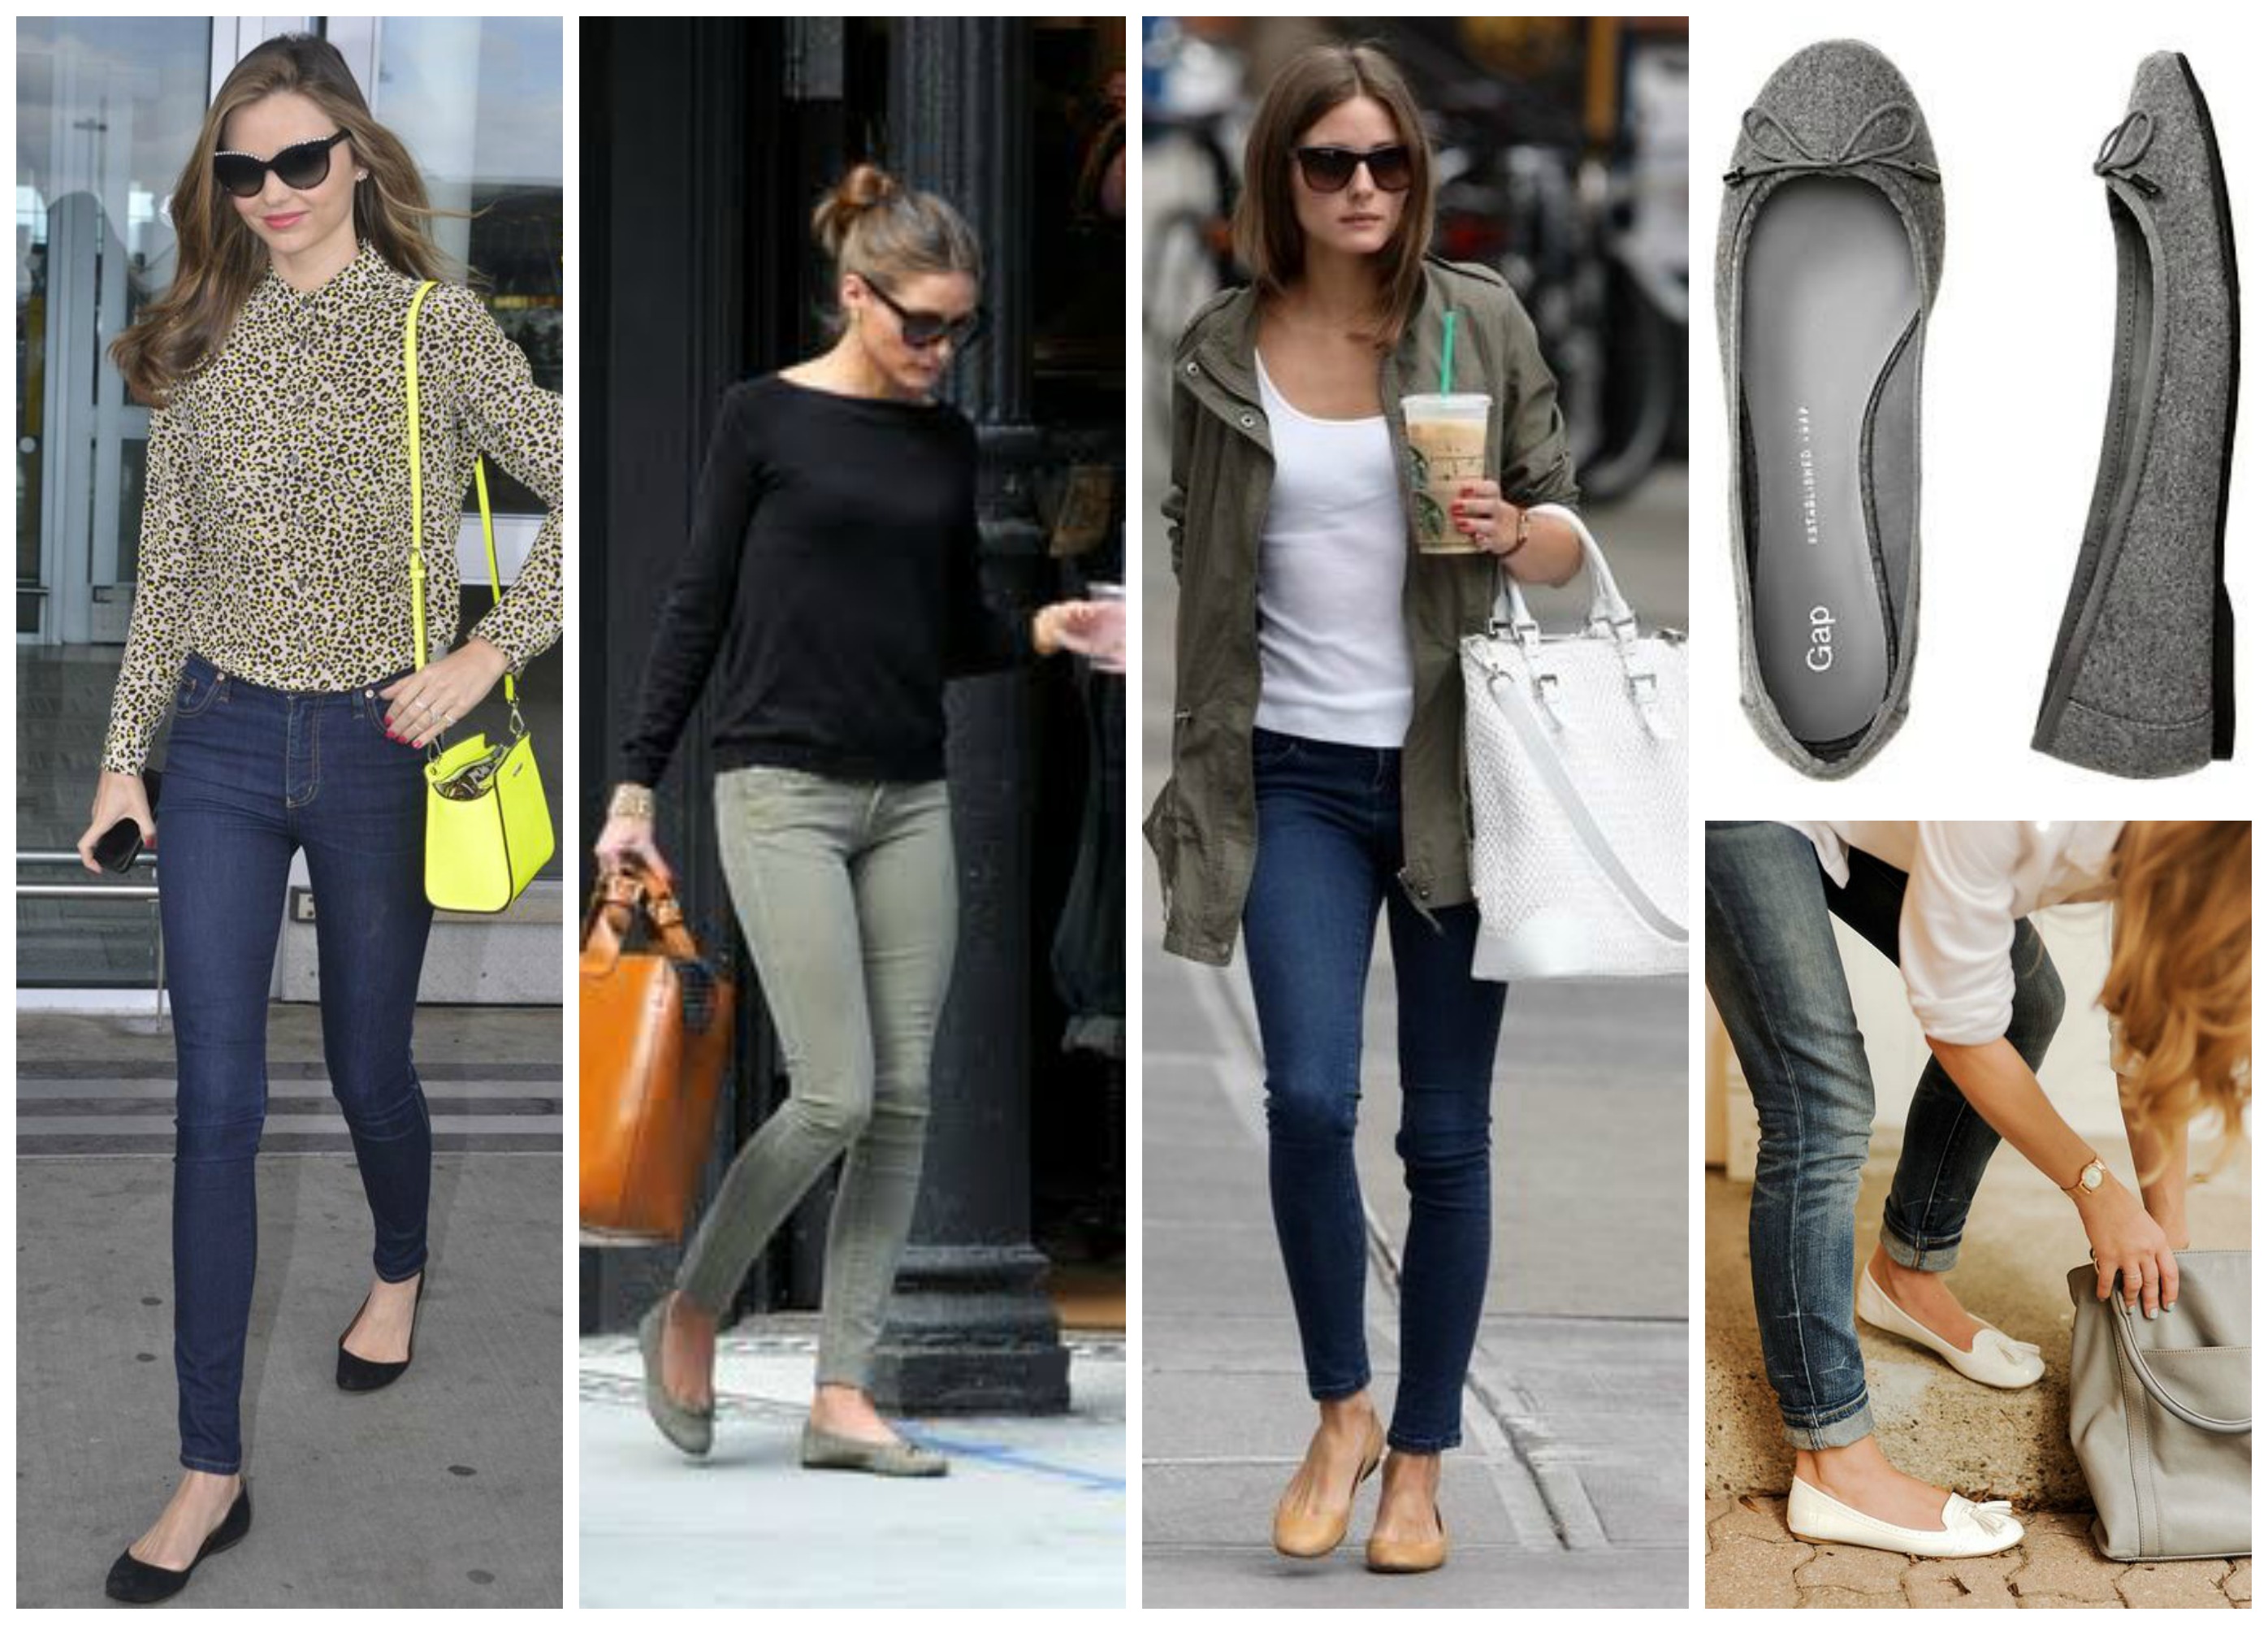 Shoes with Jeans - 31 Shoes To Wear With All Types Of Jeans